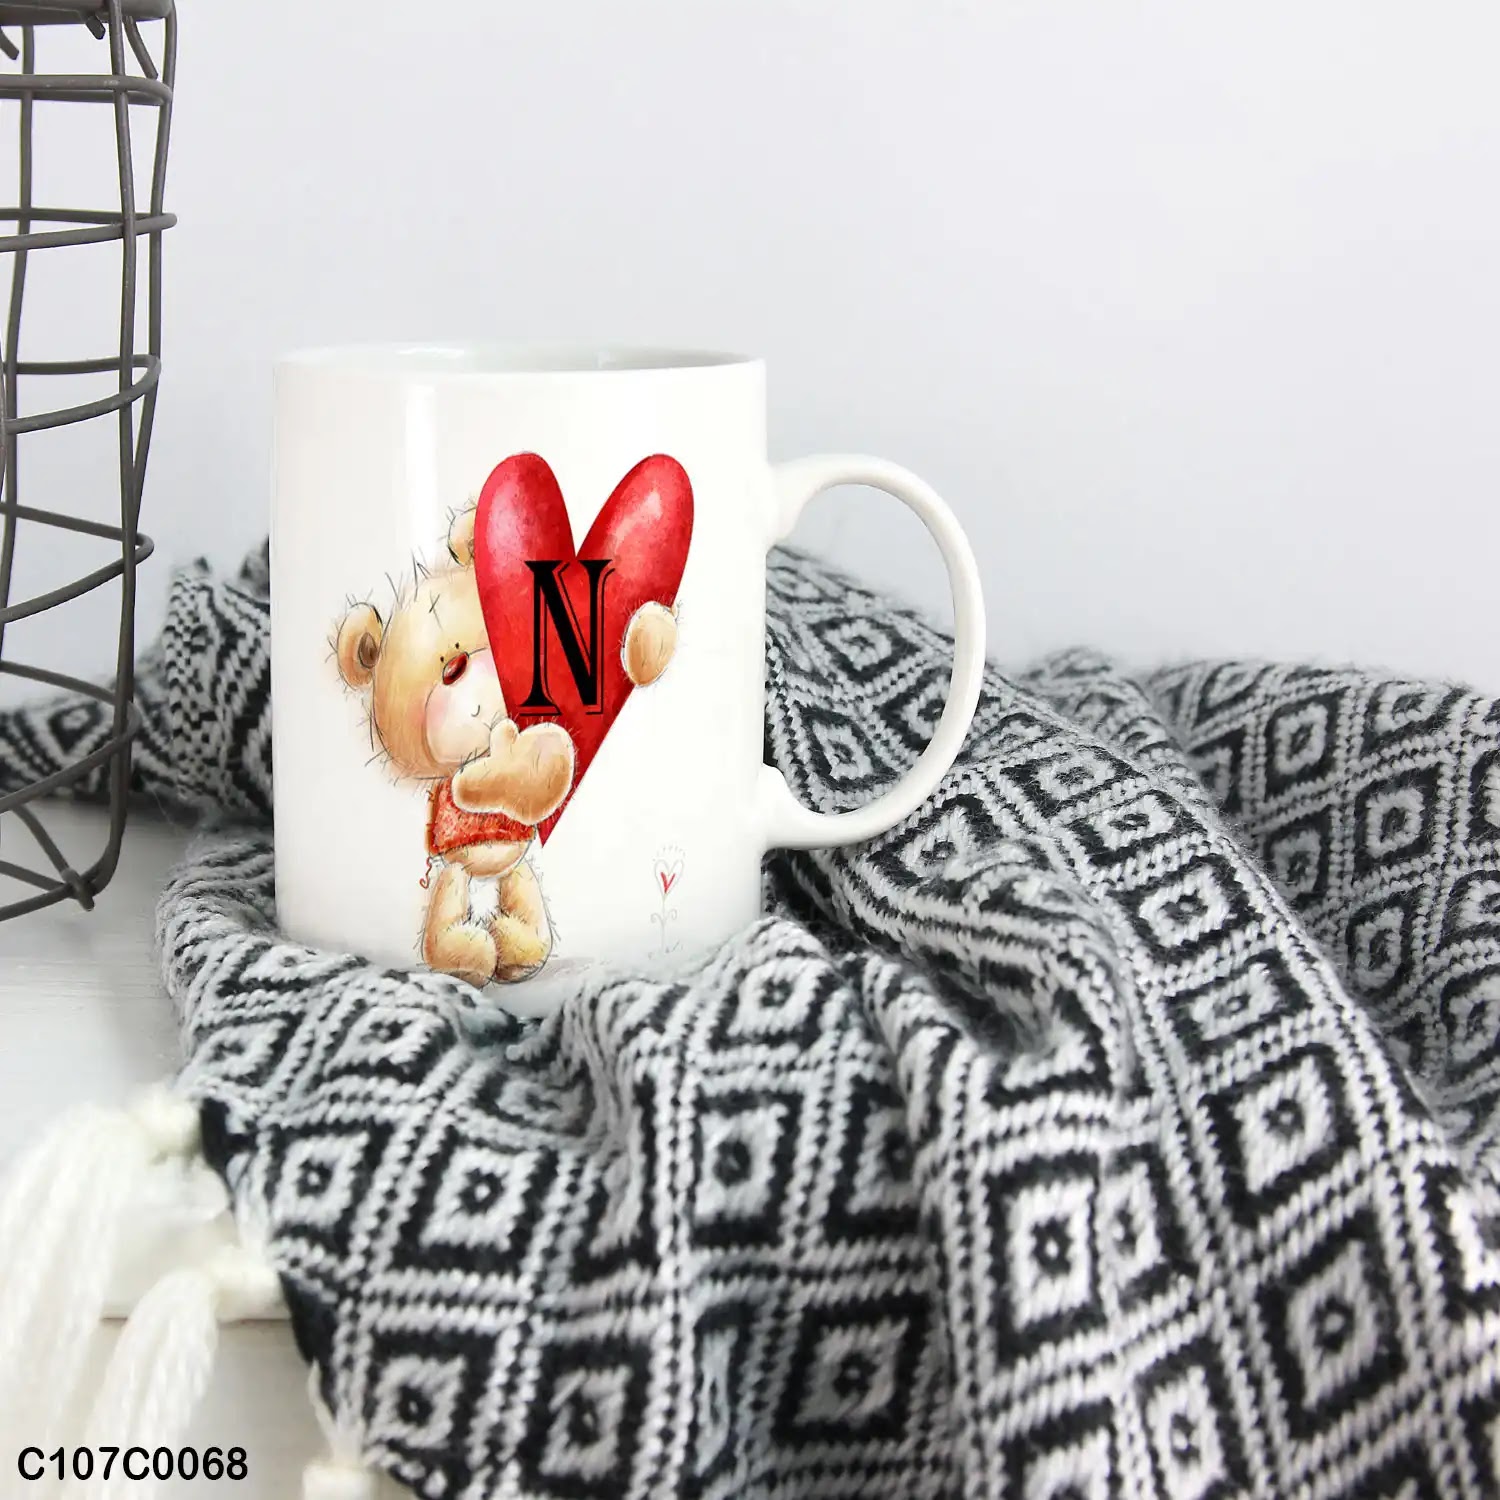 A mug (cup) printed with an image of a little bear has a heart with "N"